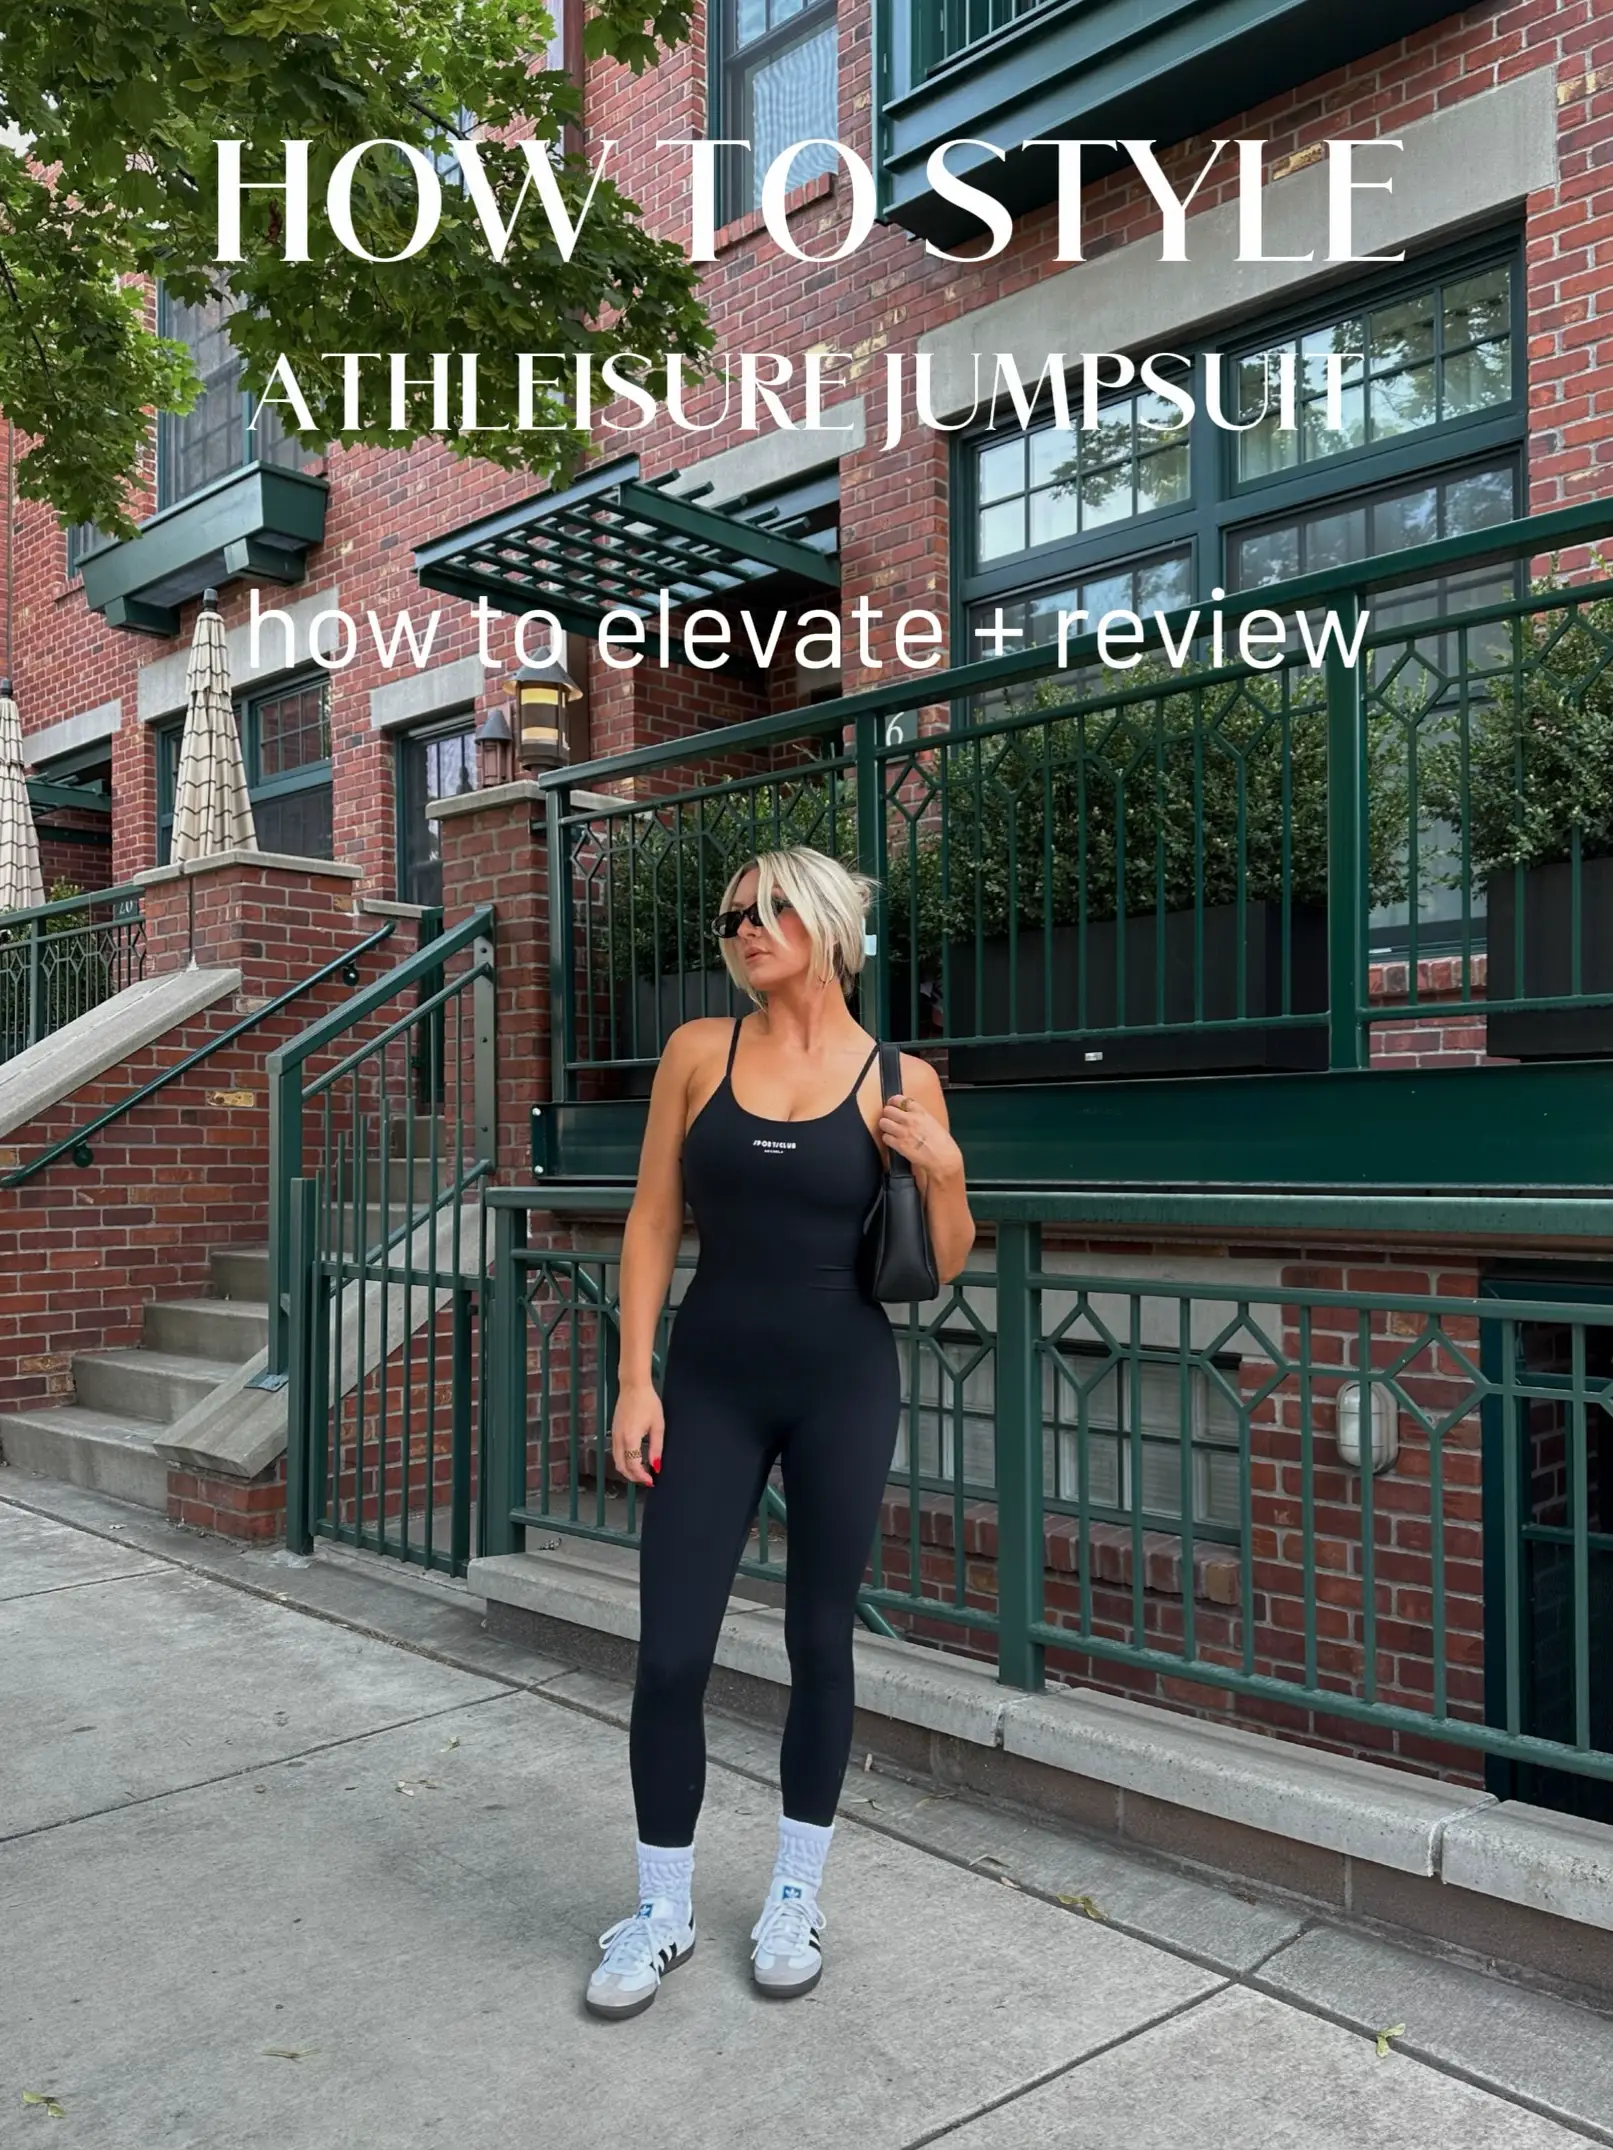 HOW TO STYLE AN ATHLEISURE JUMPSUIT, Gallery posted by marissa ♡